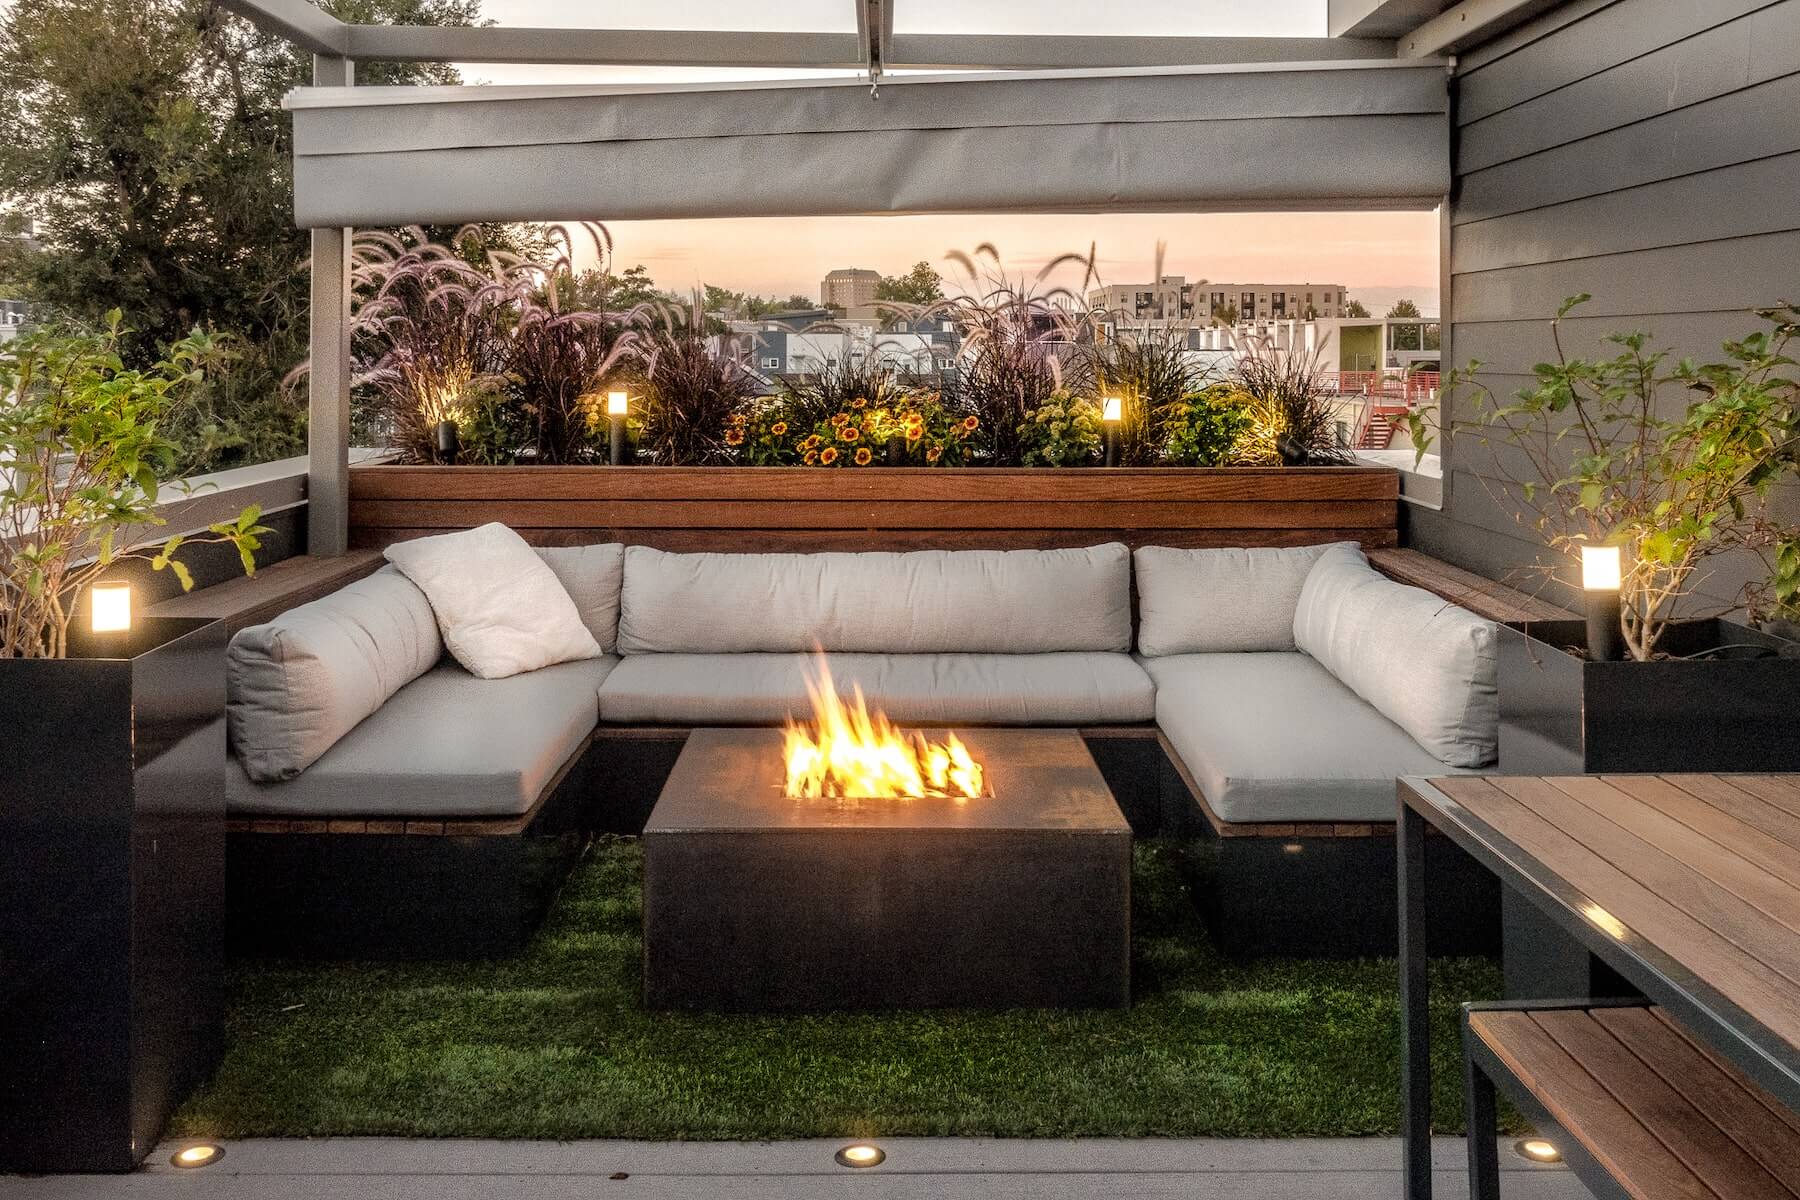 Rooftop Deck With Retractable Canopy, Roof Terrace Fire Pit